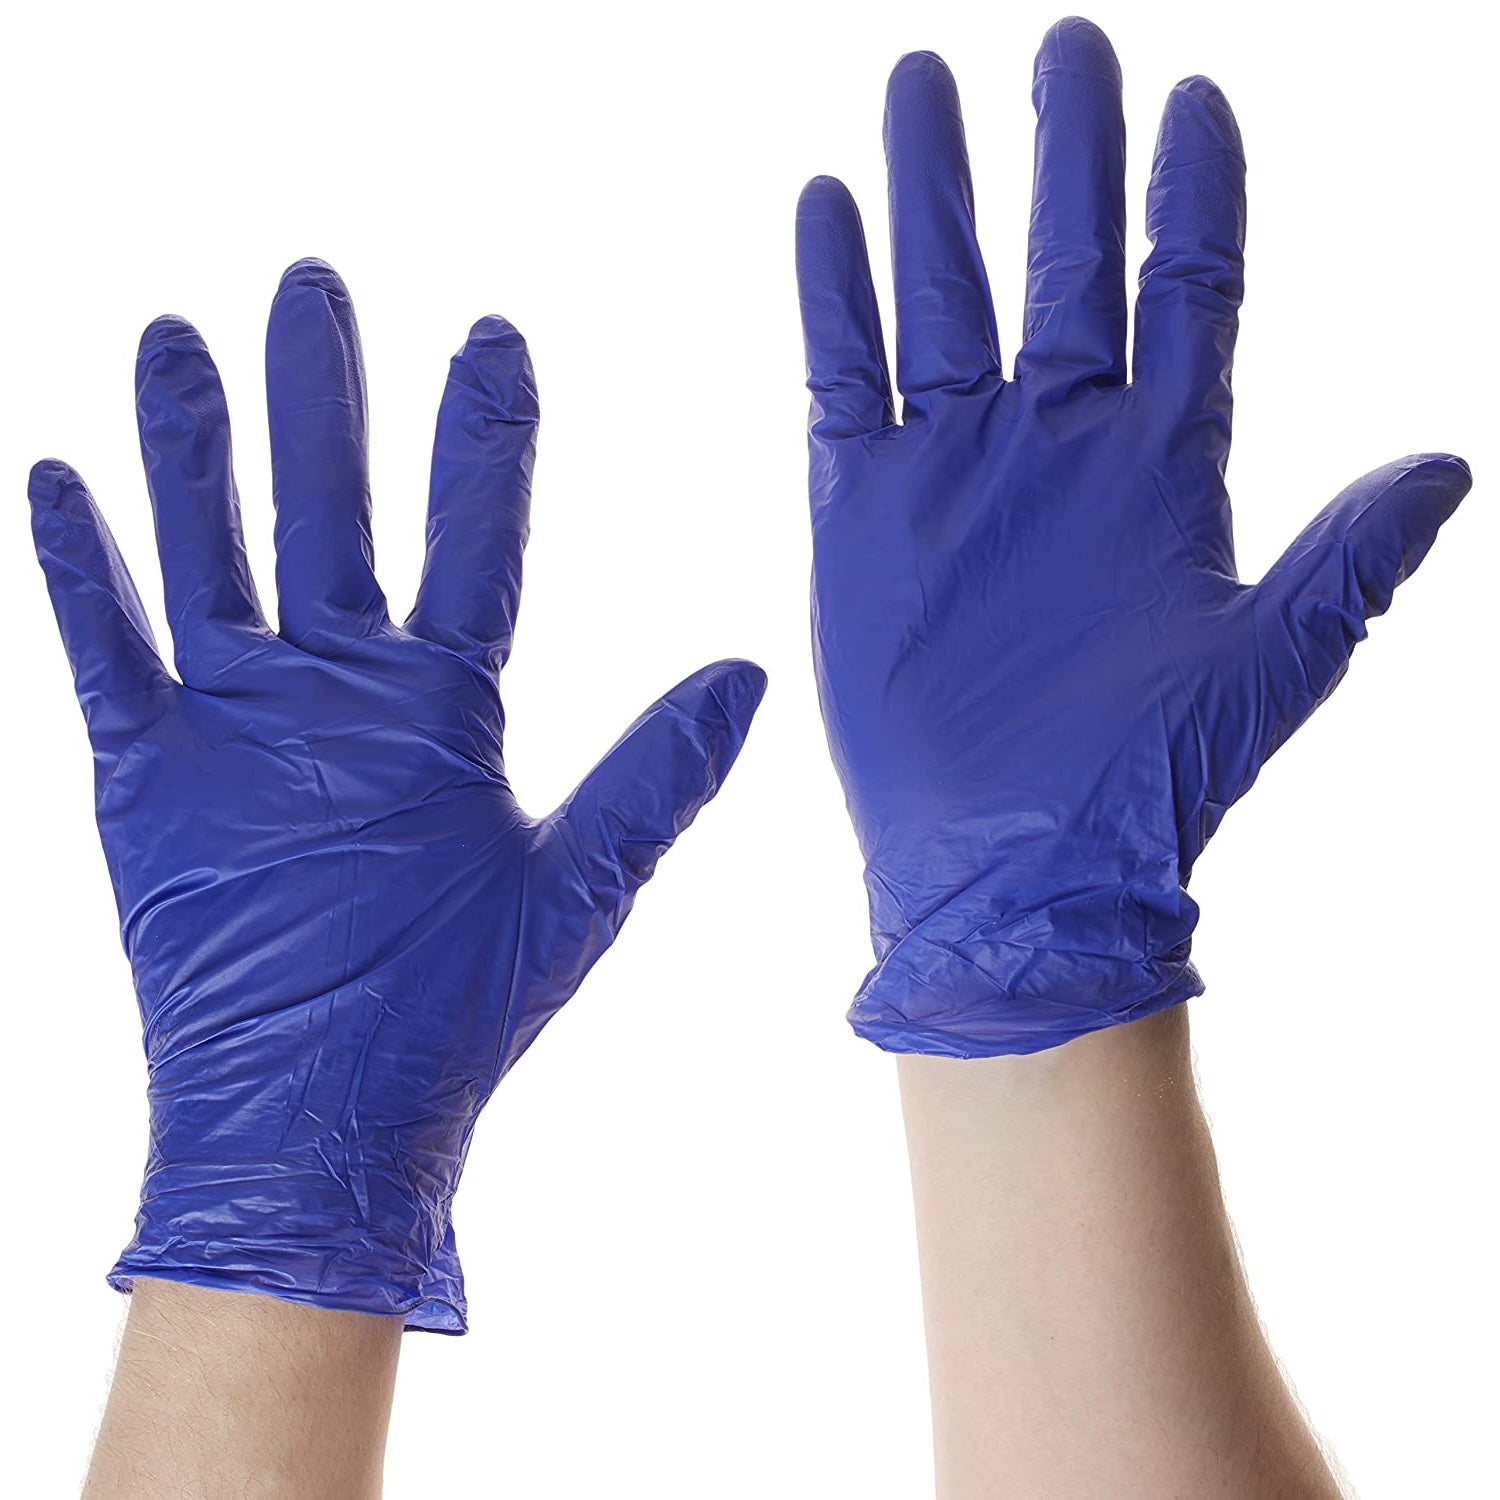 Nytraguard Chemopure Gloves | Nitrile | Powder Free | Purple | Large | Pack of 100 Pieces (1)